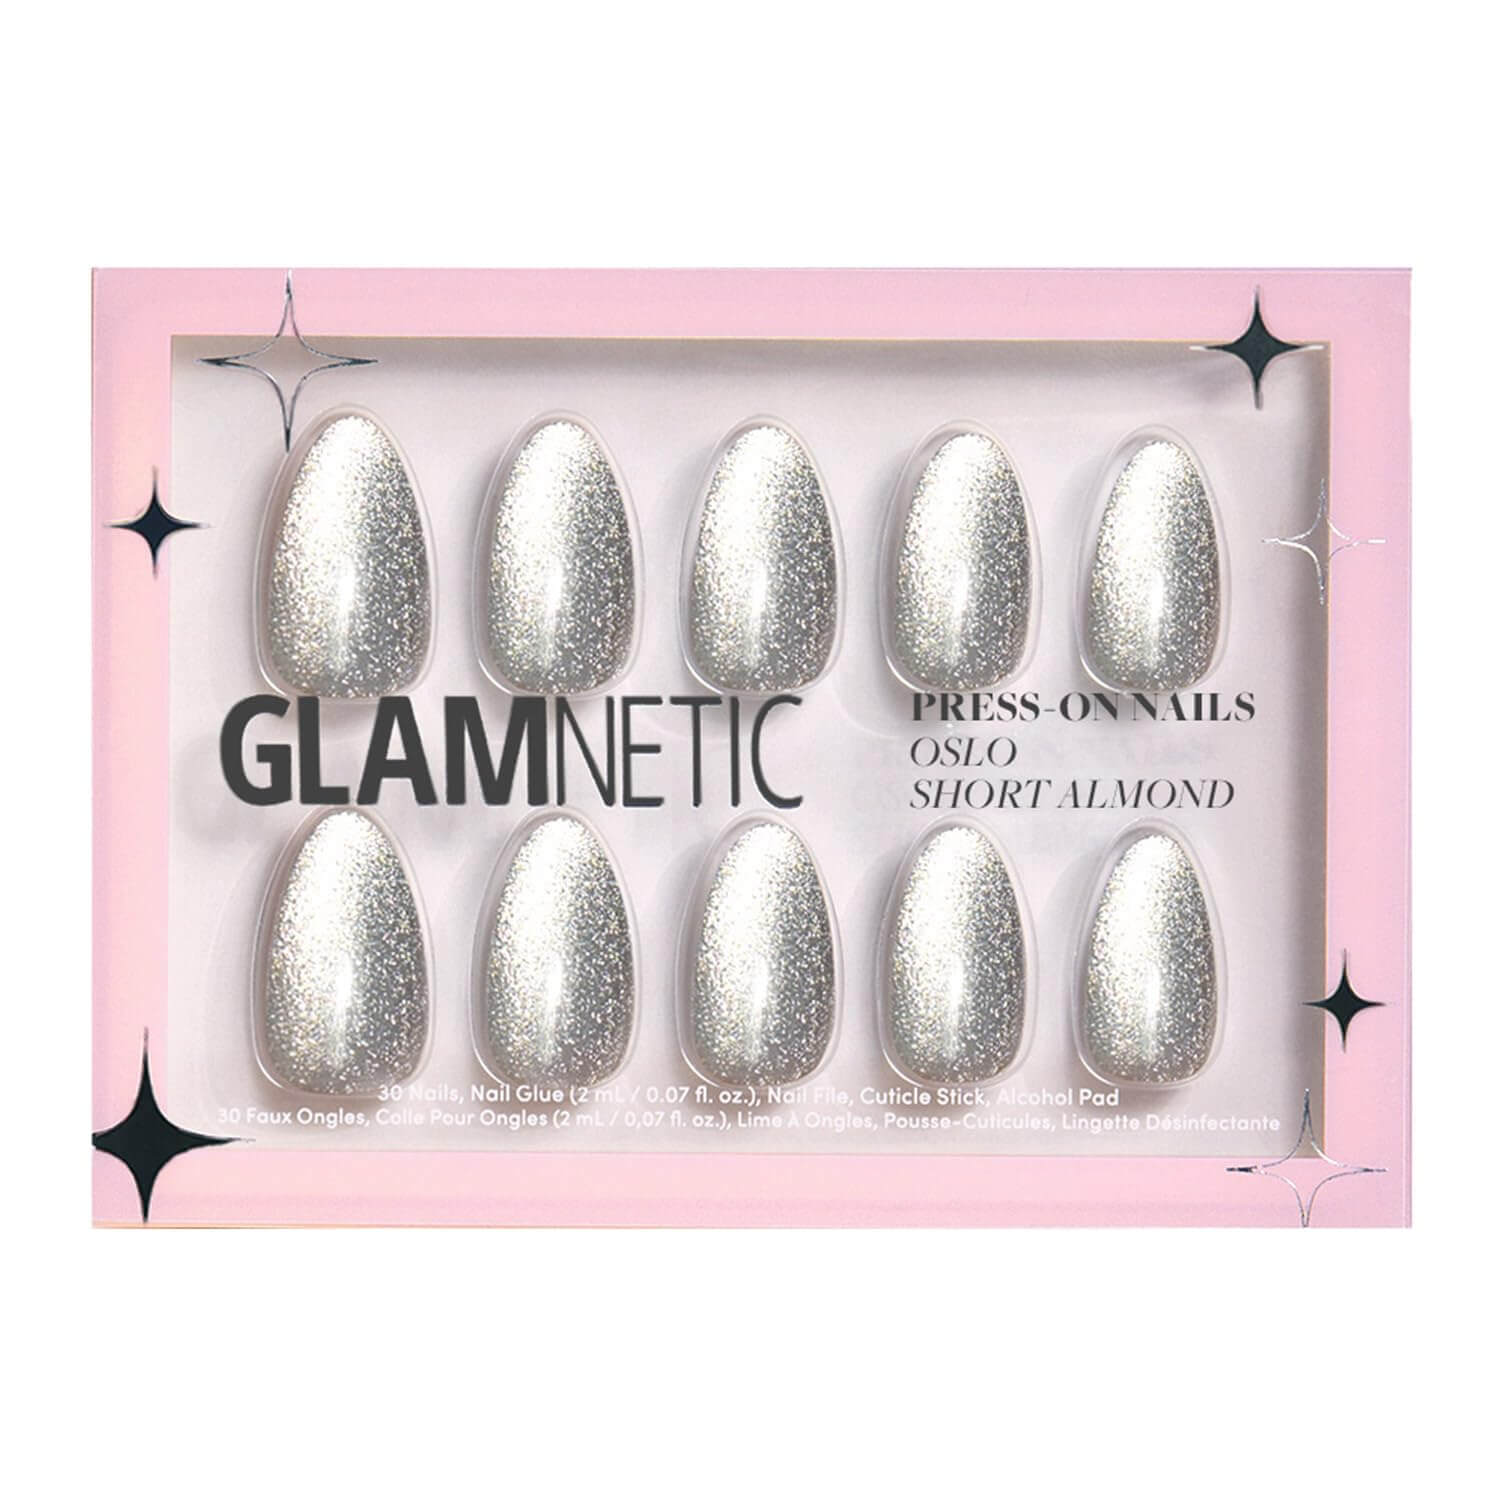 Glamnetic Press-On Nails in Oslo